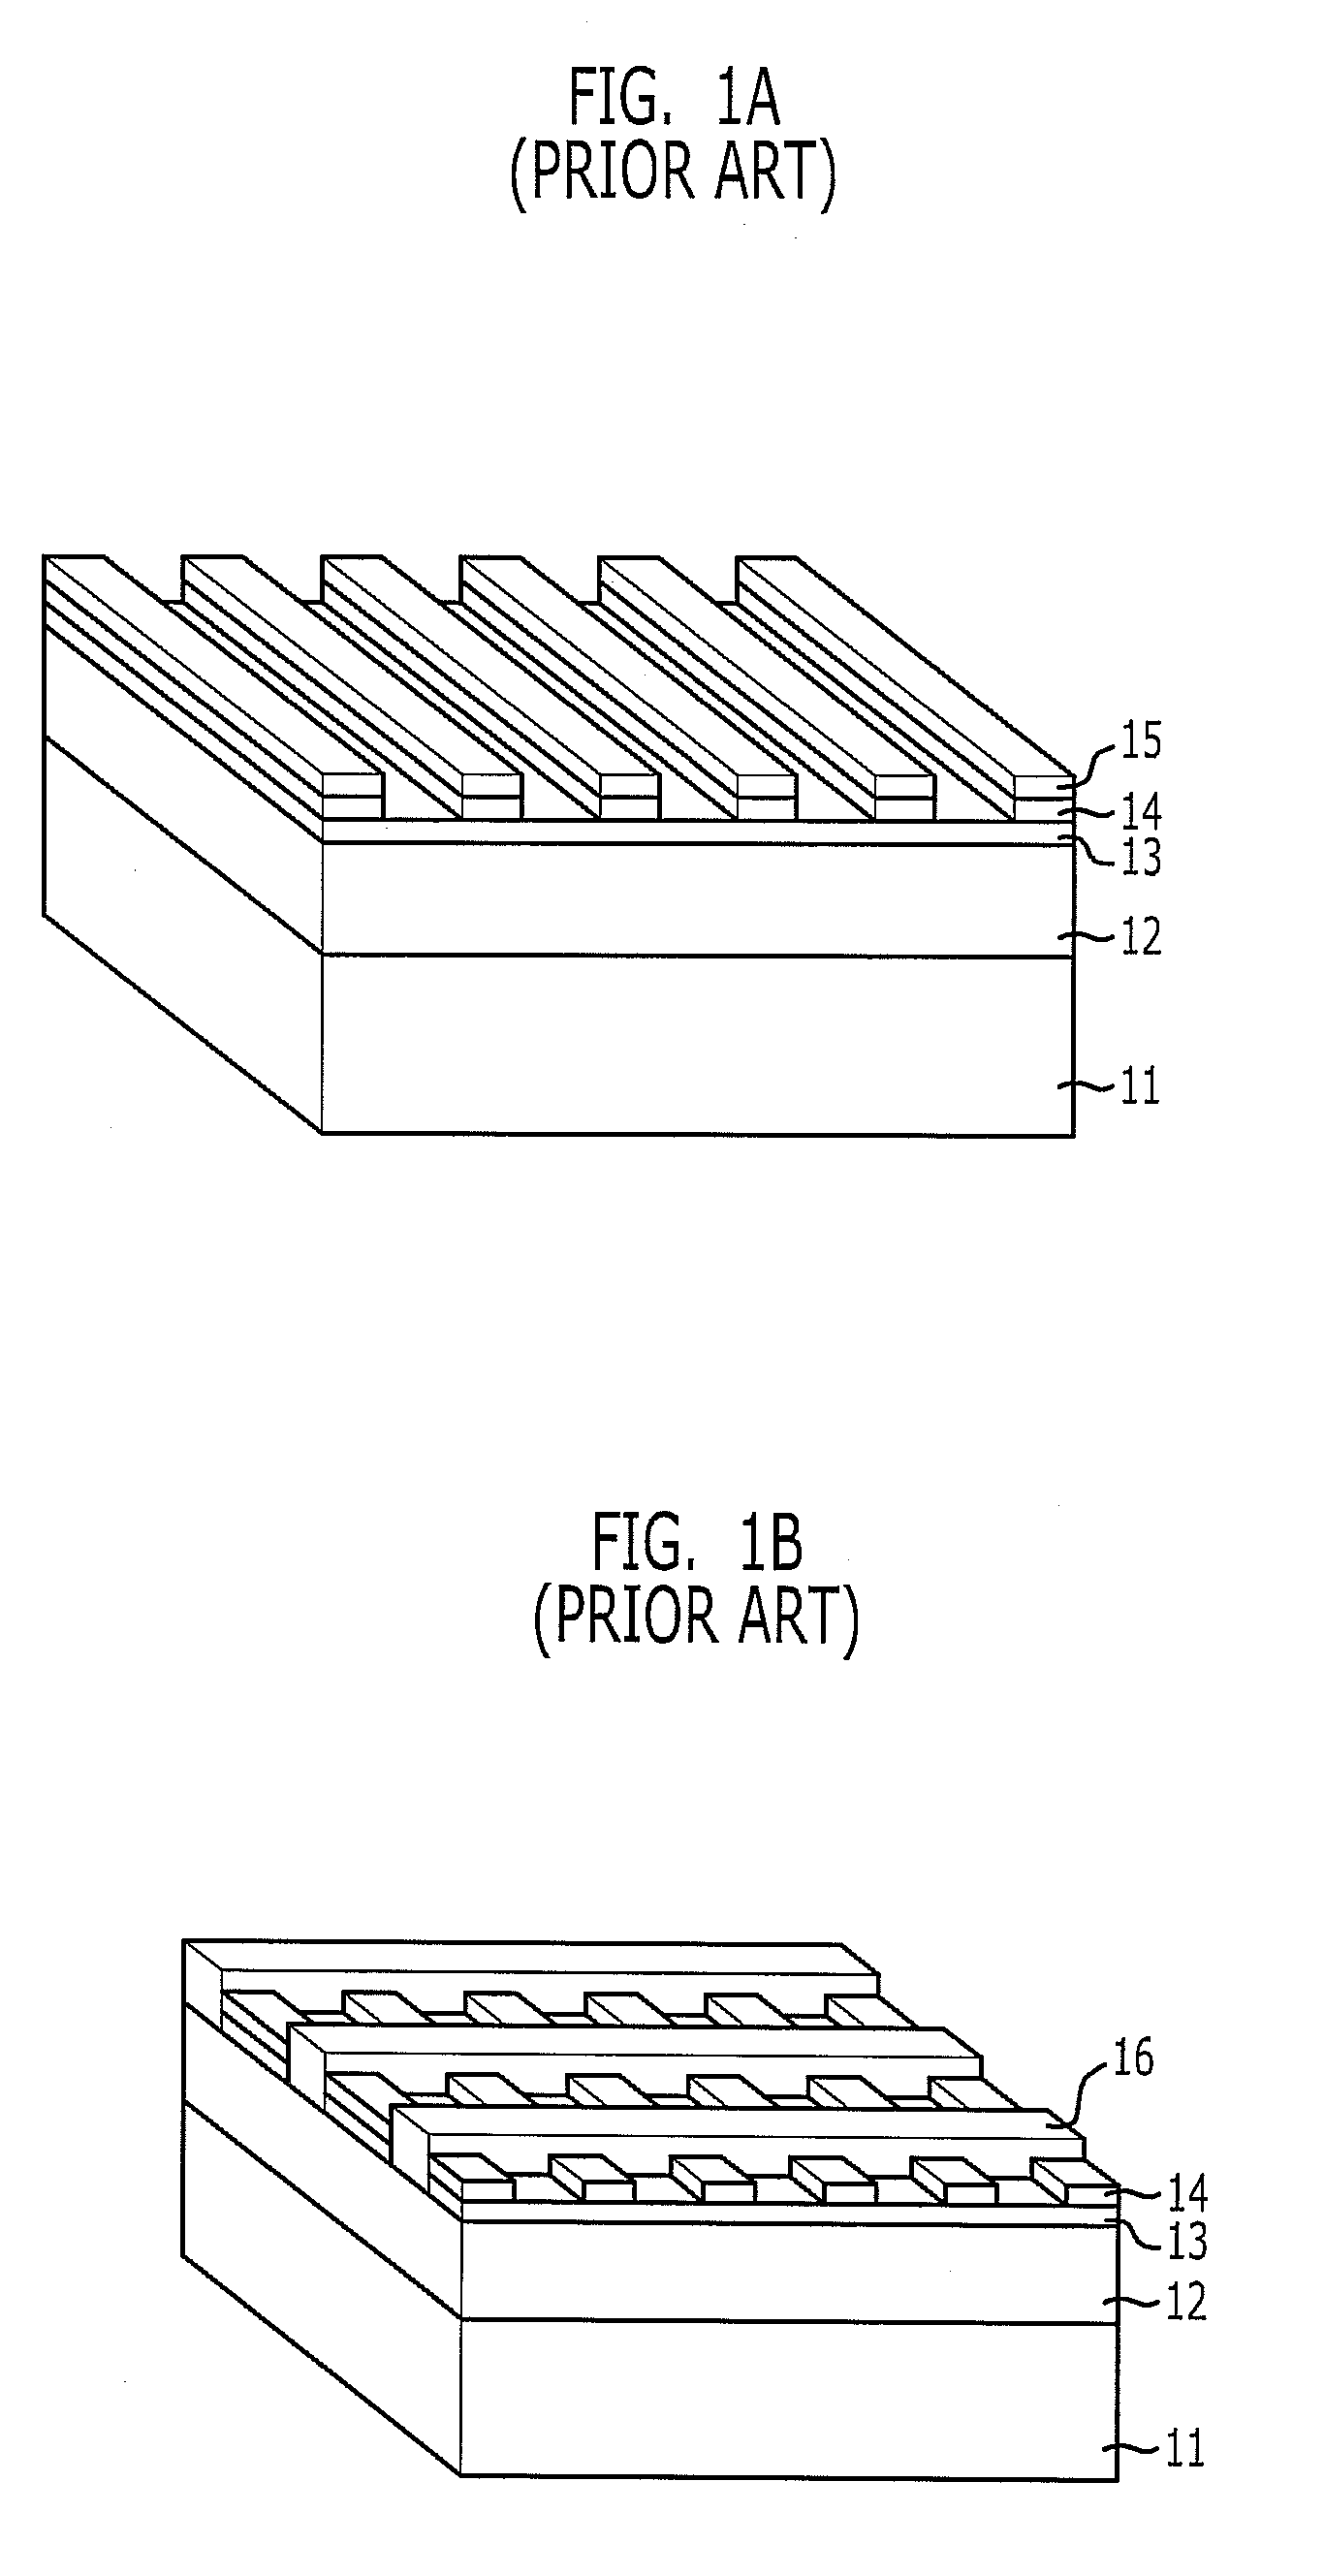 Method for fabricating semiconductor device using a double patterning process